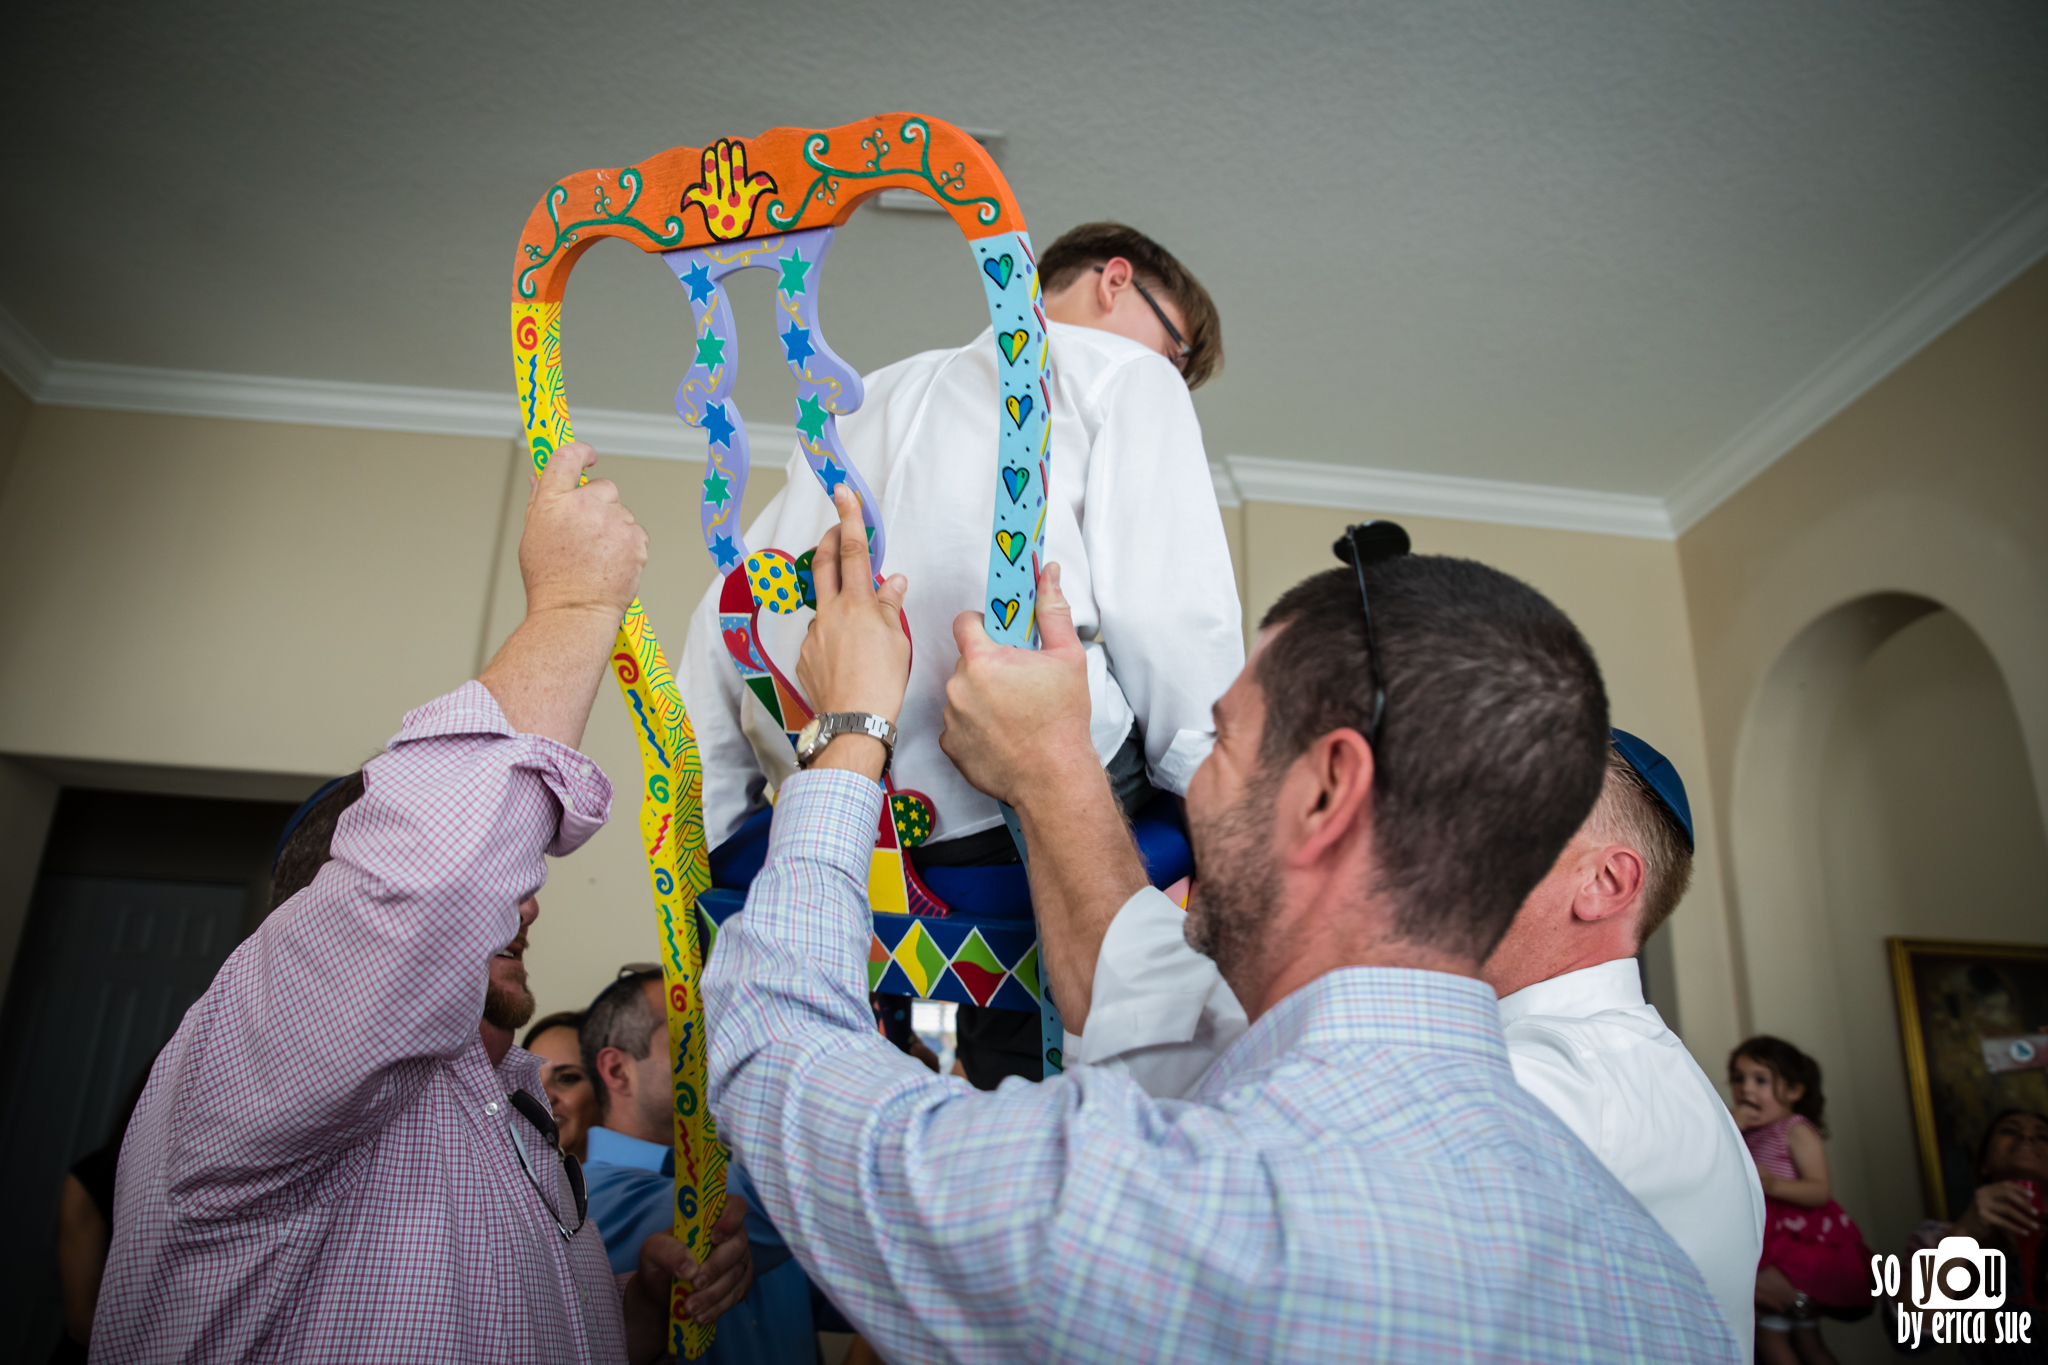 bar-mitzvah-photography-ft-lauderdale-so-you-by-erica-sue-8015.jpg